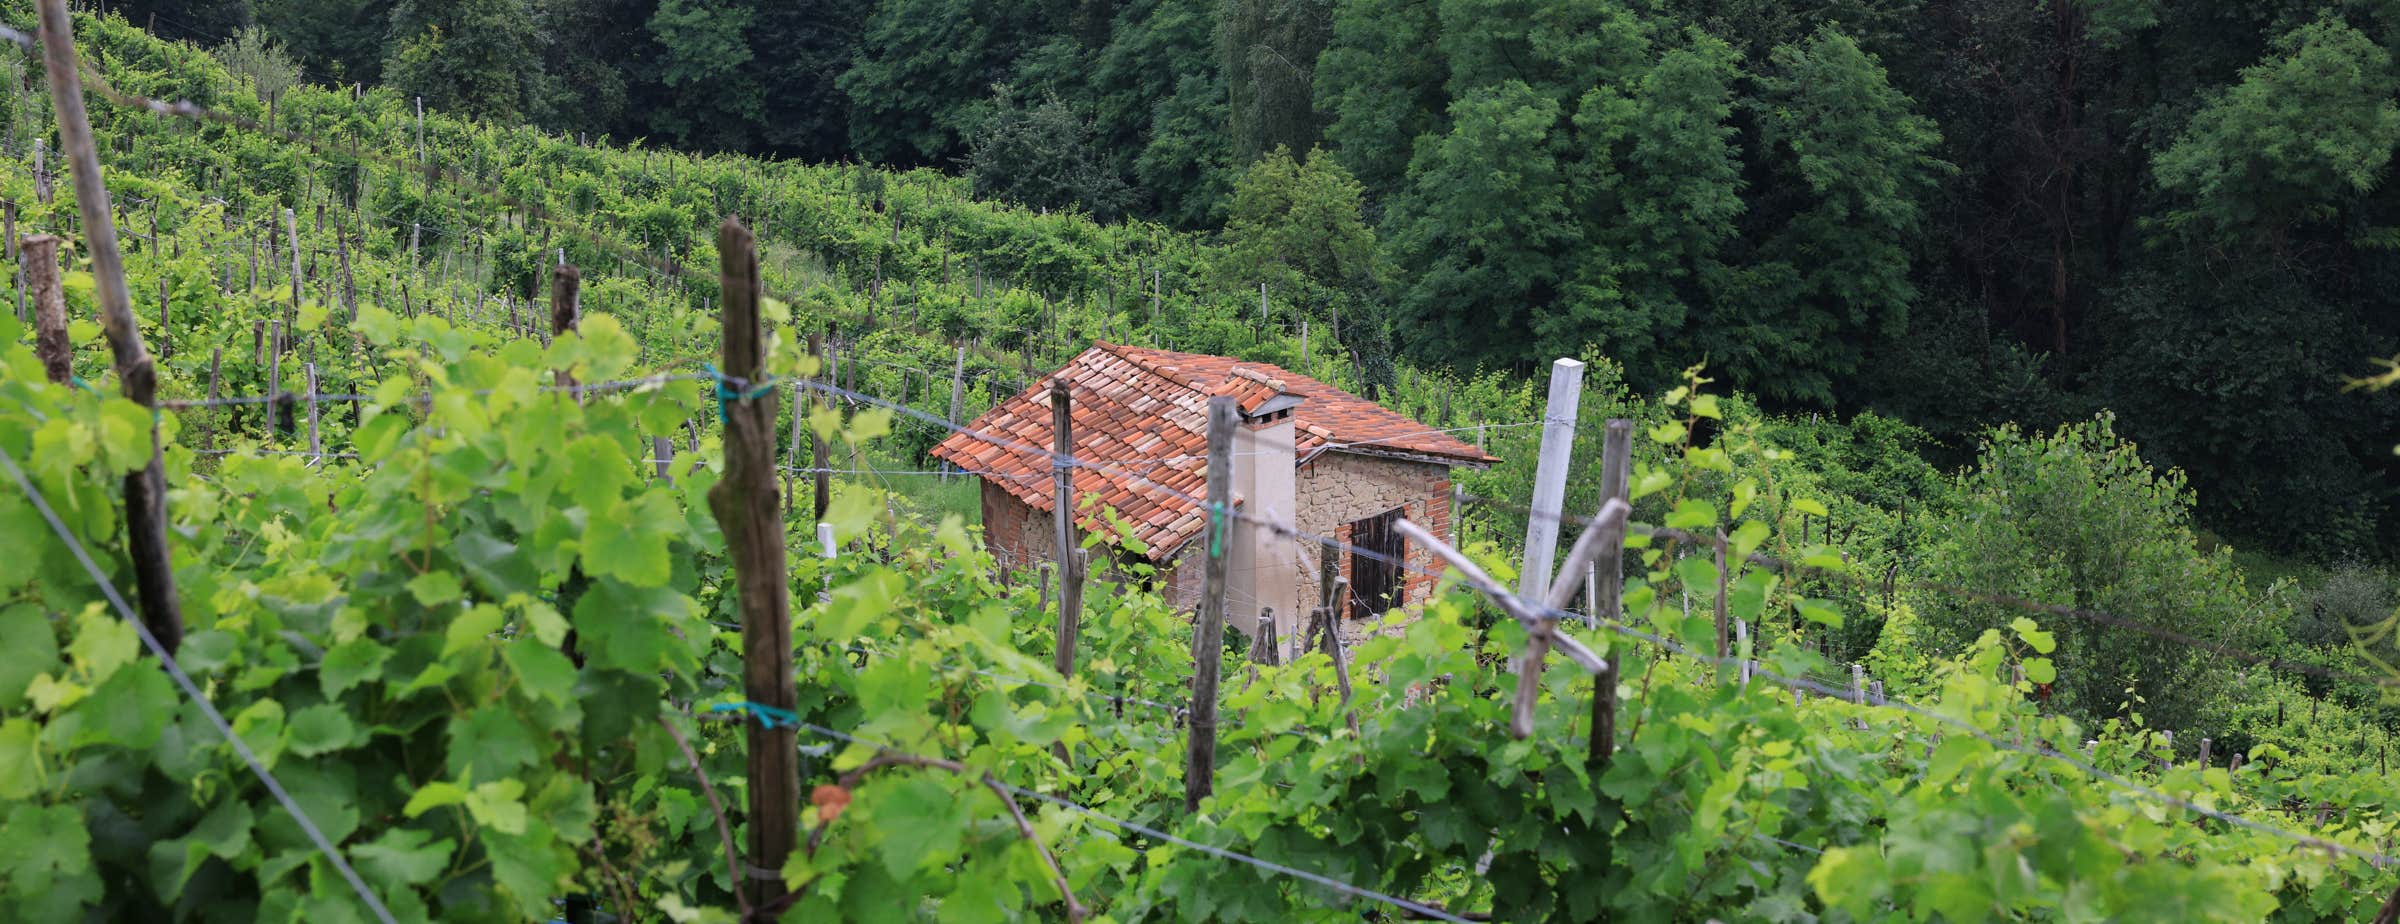 The picture was taken in the middle of a vineyard. You can see an old small house for vineyard workers from above. The house is densely surrounded by vines and deep green deciduous trees can be seen in the background.